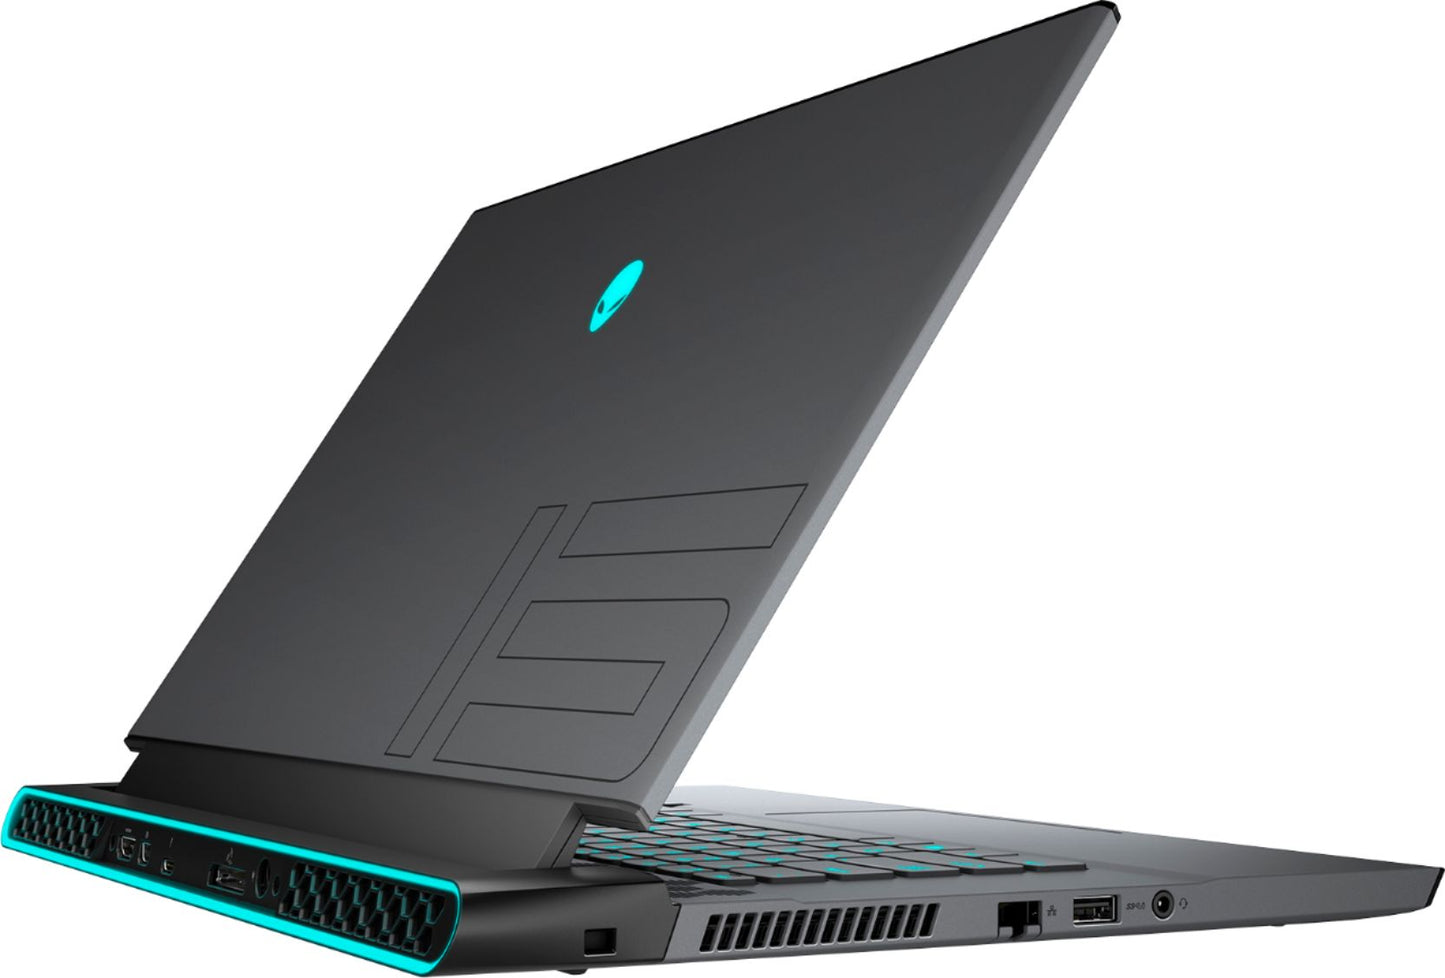 Alienware - m15 R4 15.6" FHD Gaming Laptop - Intel Core i7 - 16GB Memory - NVIDIA GeForce RTX 3070 - 512GB Solid State Drive - Dark Side of the Moon